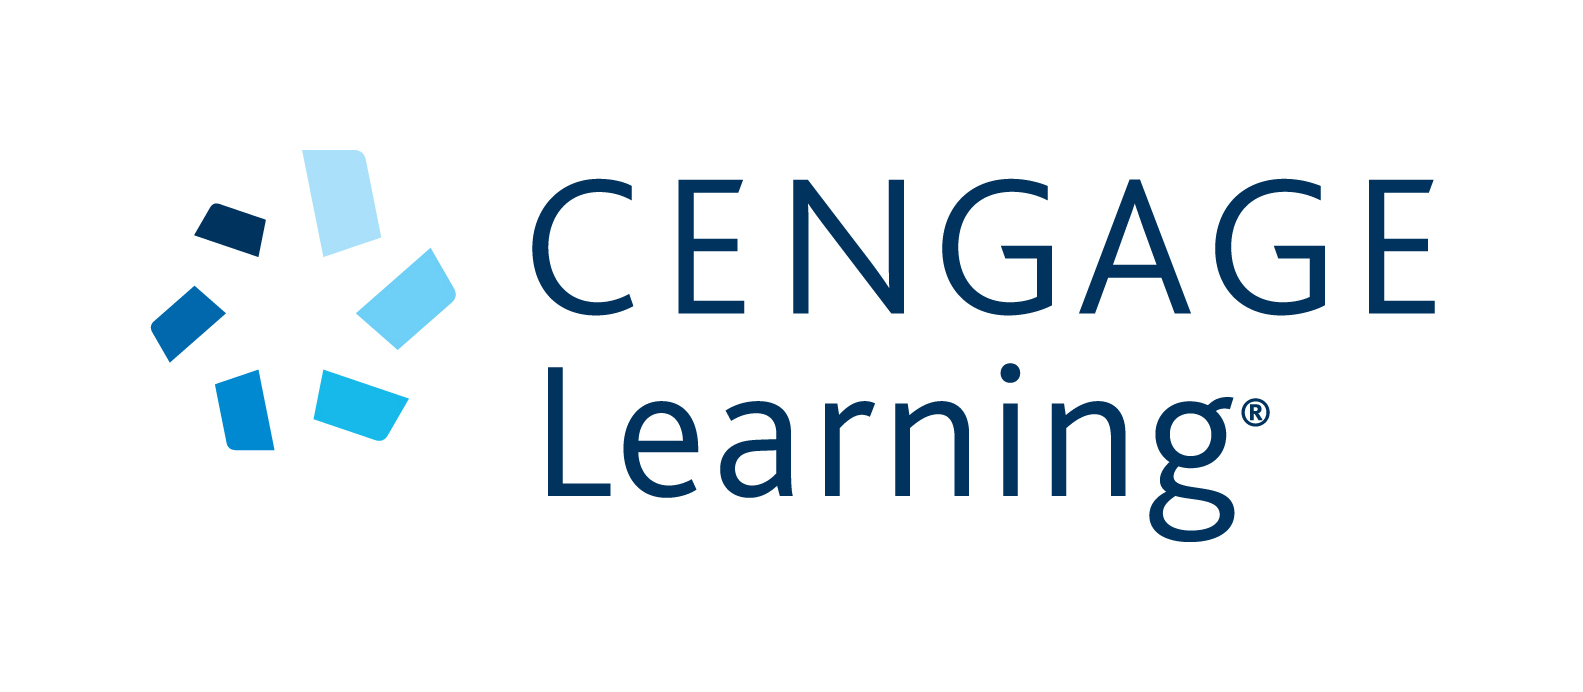 Cengage Learning,